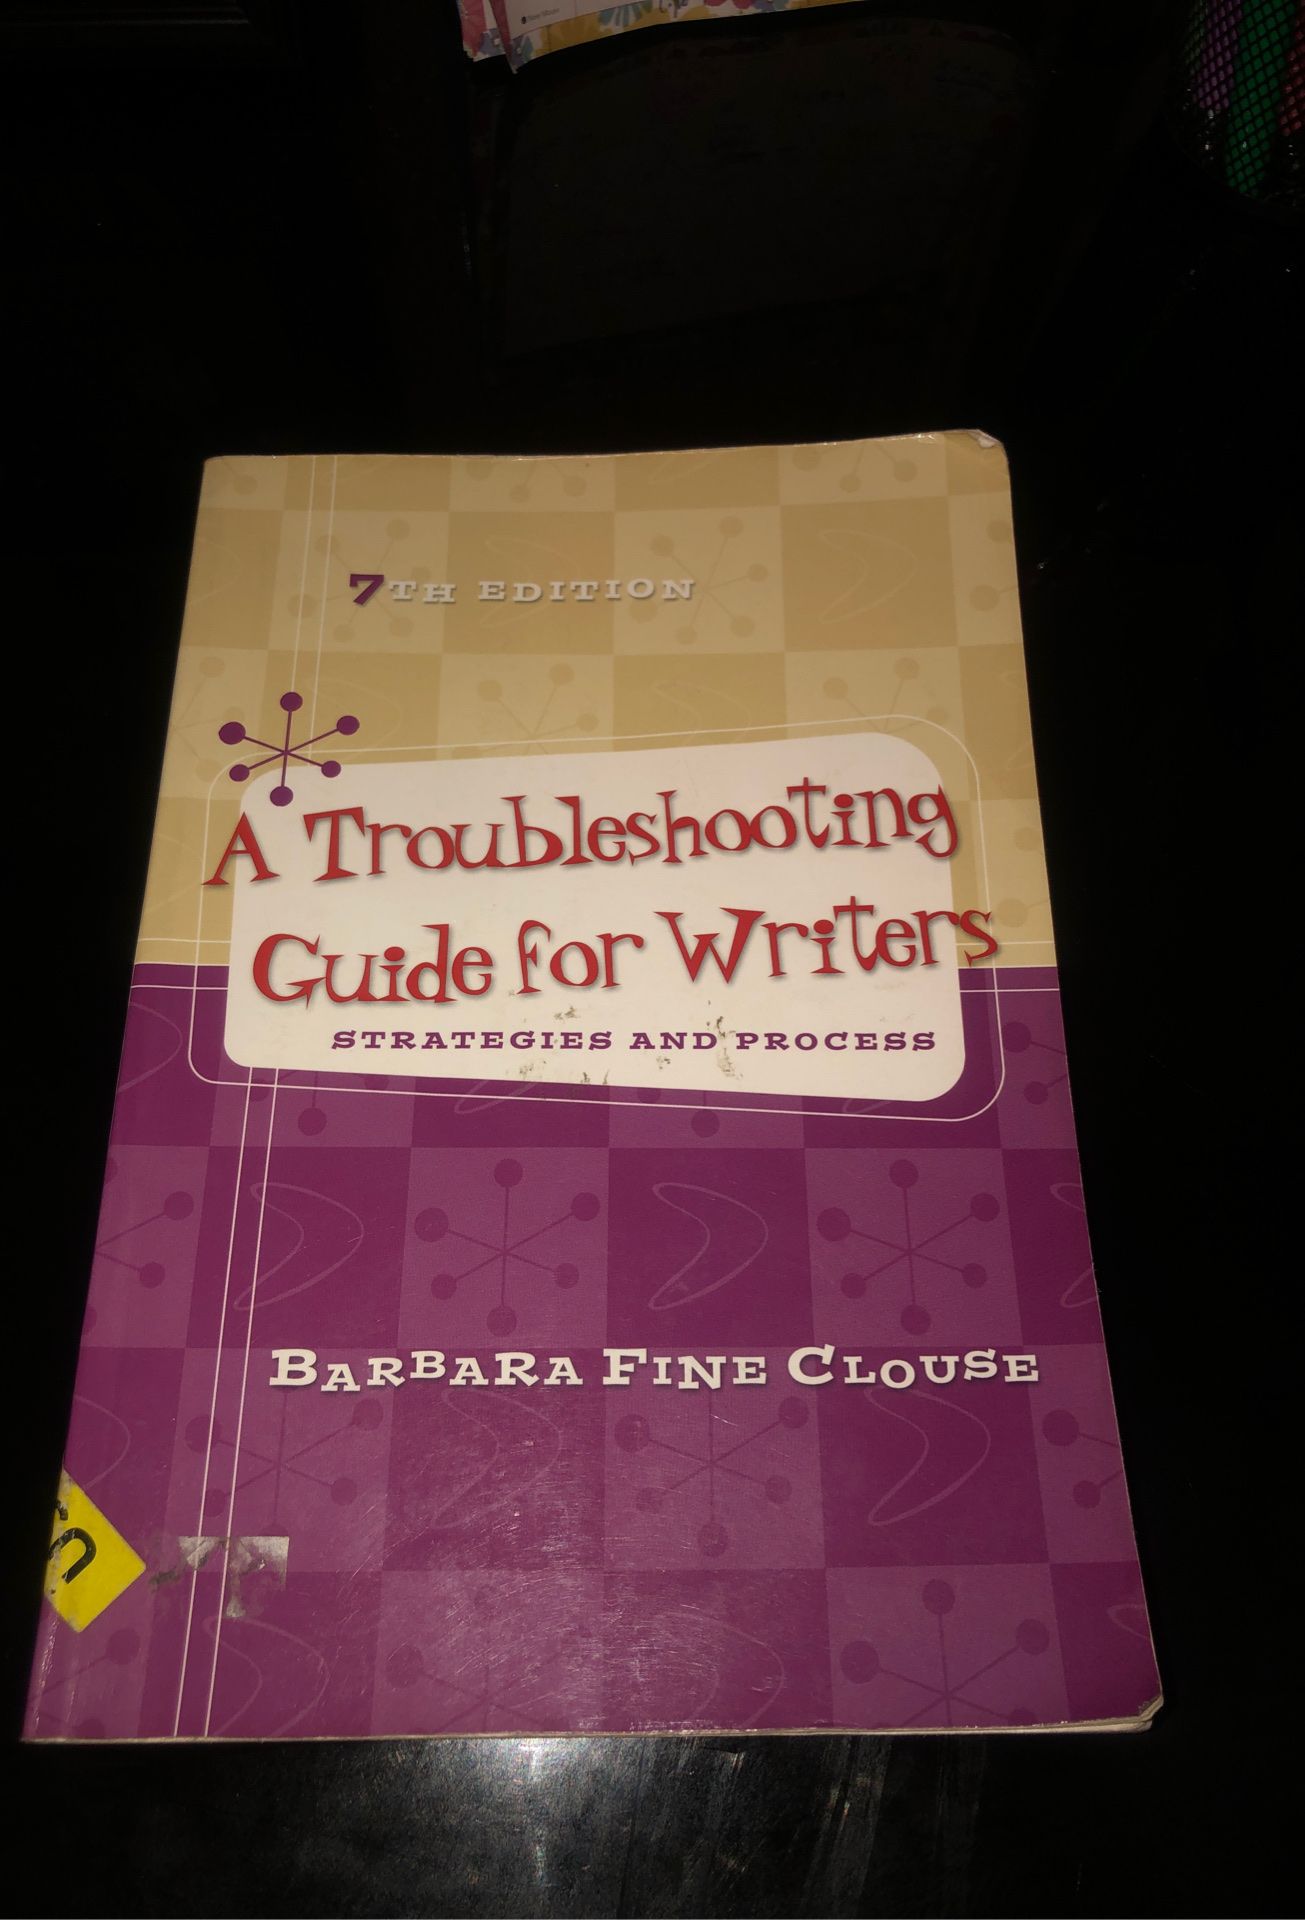 A troubleshooting guide for writers 7th edition